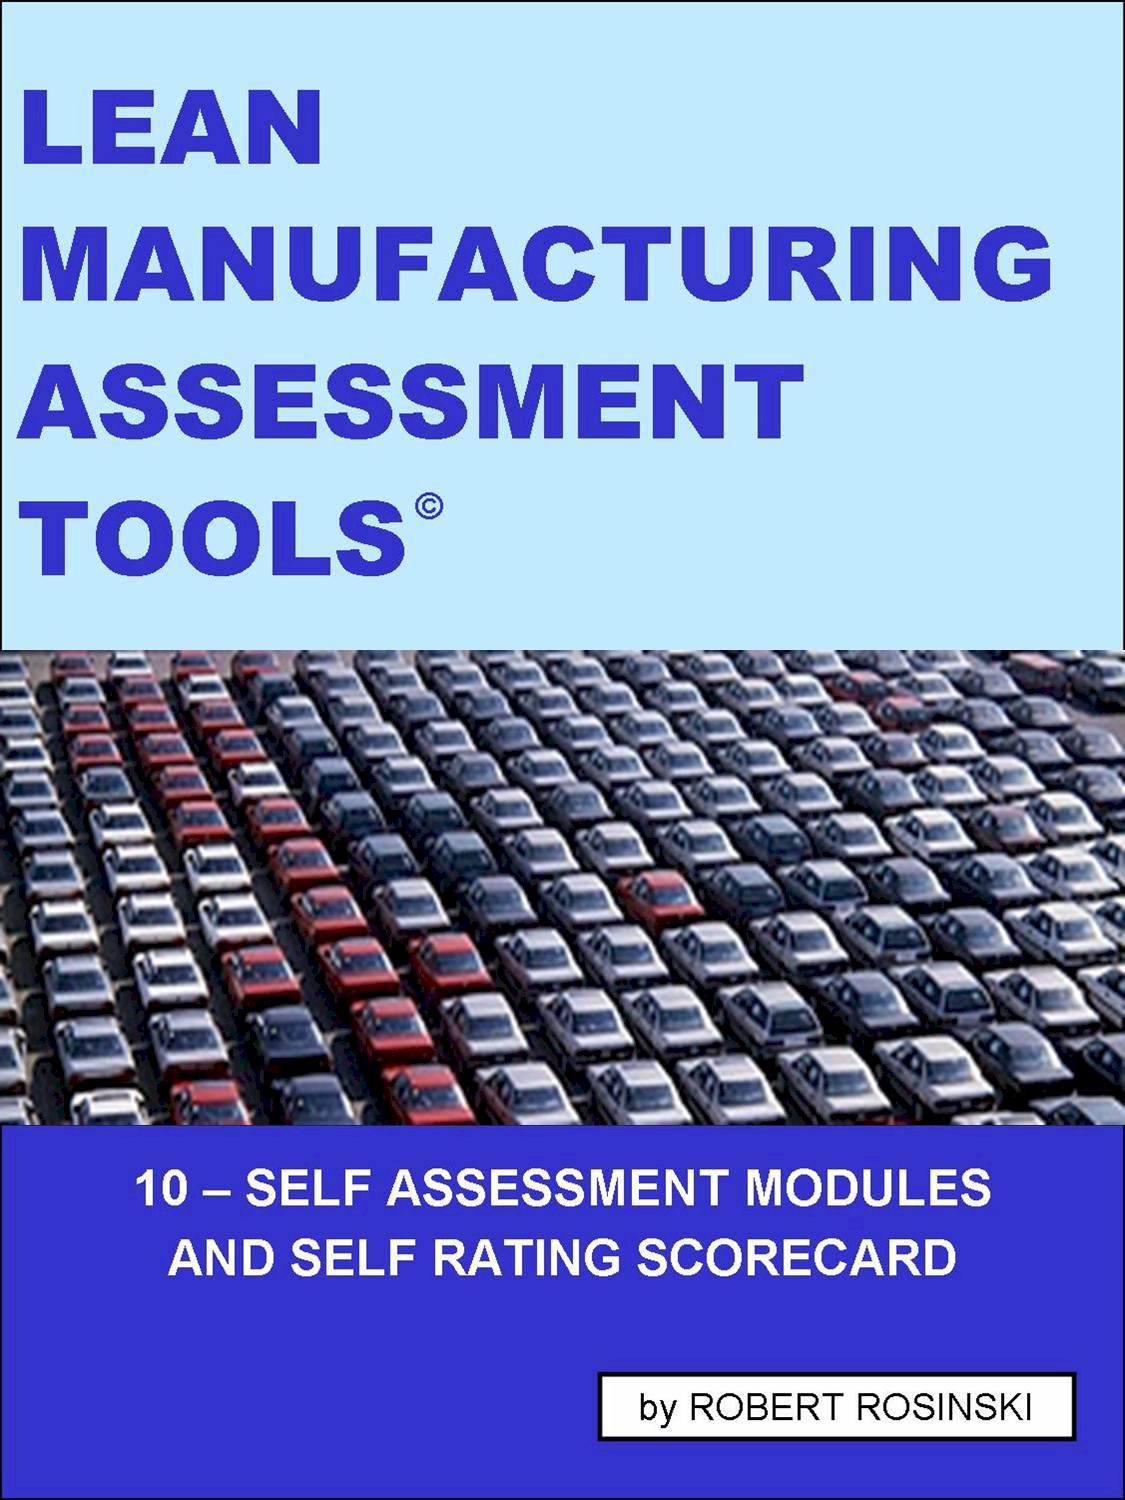 Lean Manufacturing Assessment Tools